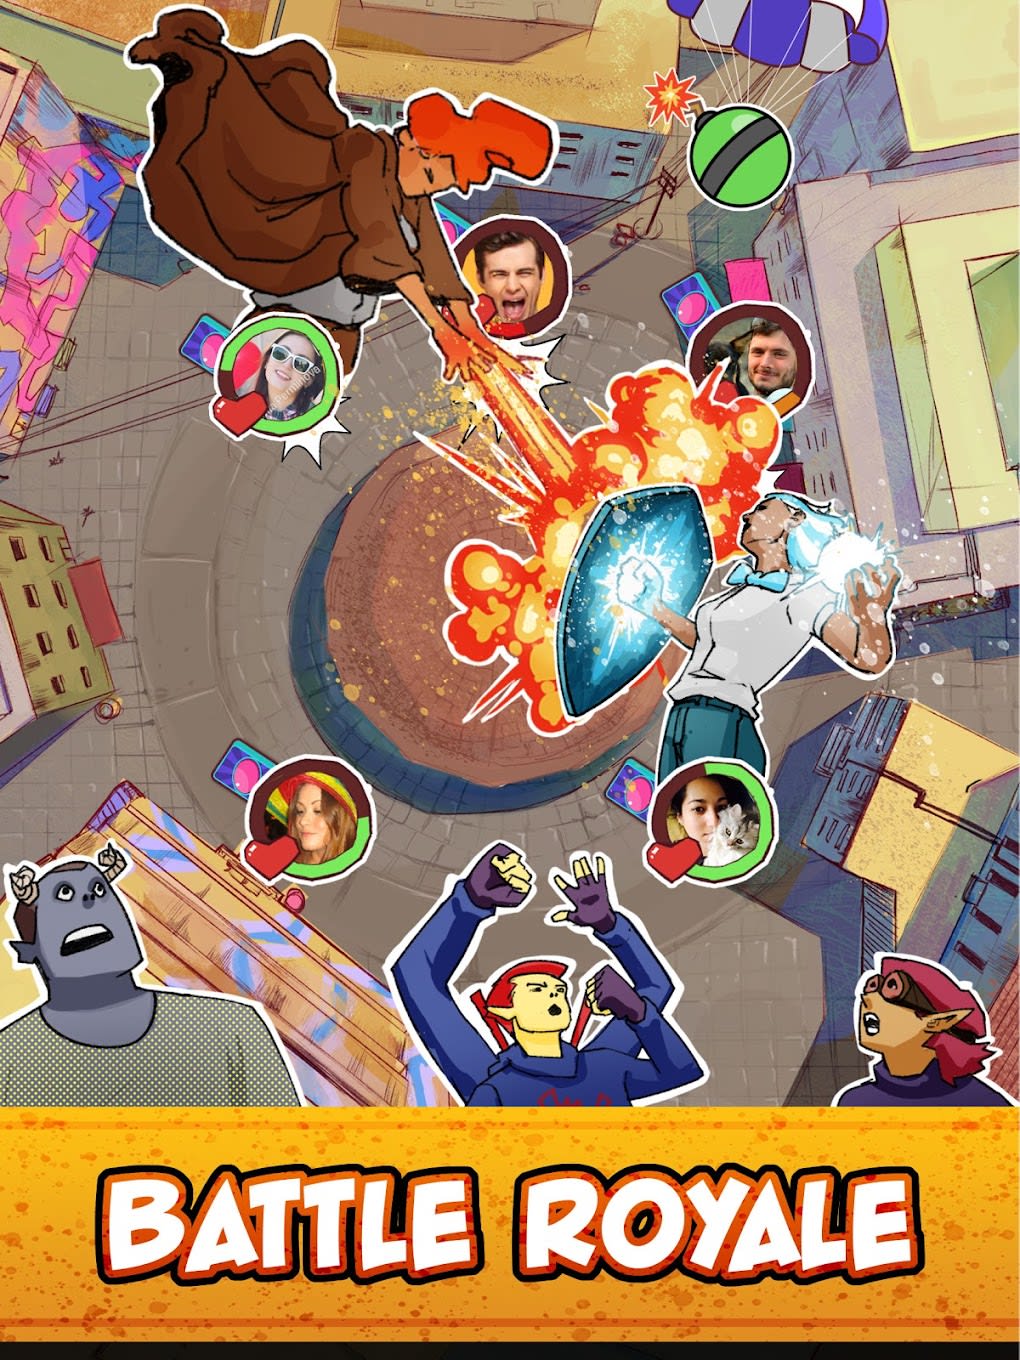 Card Battle Uno - Classic Game APK for Android Download